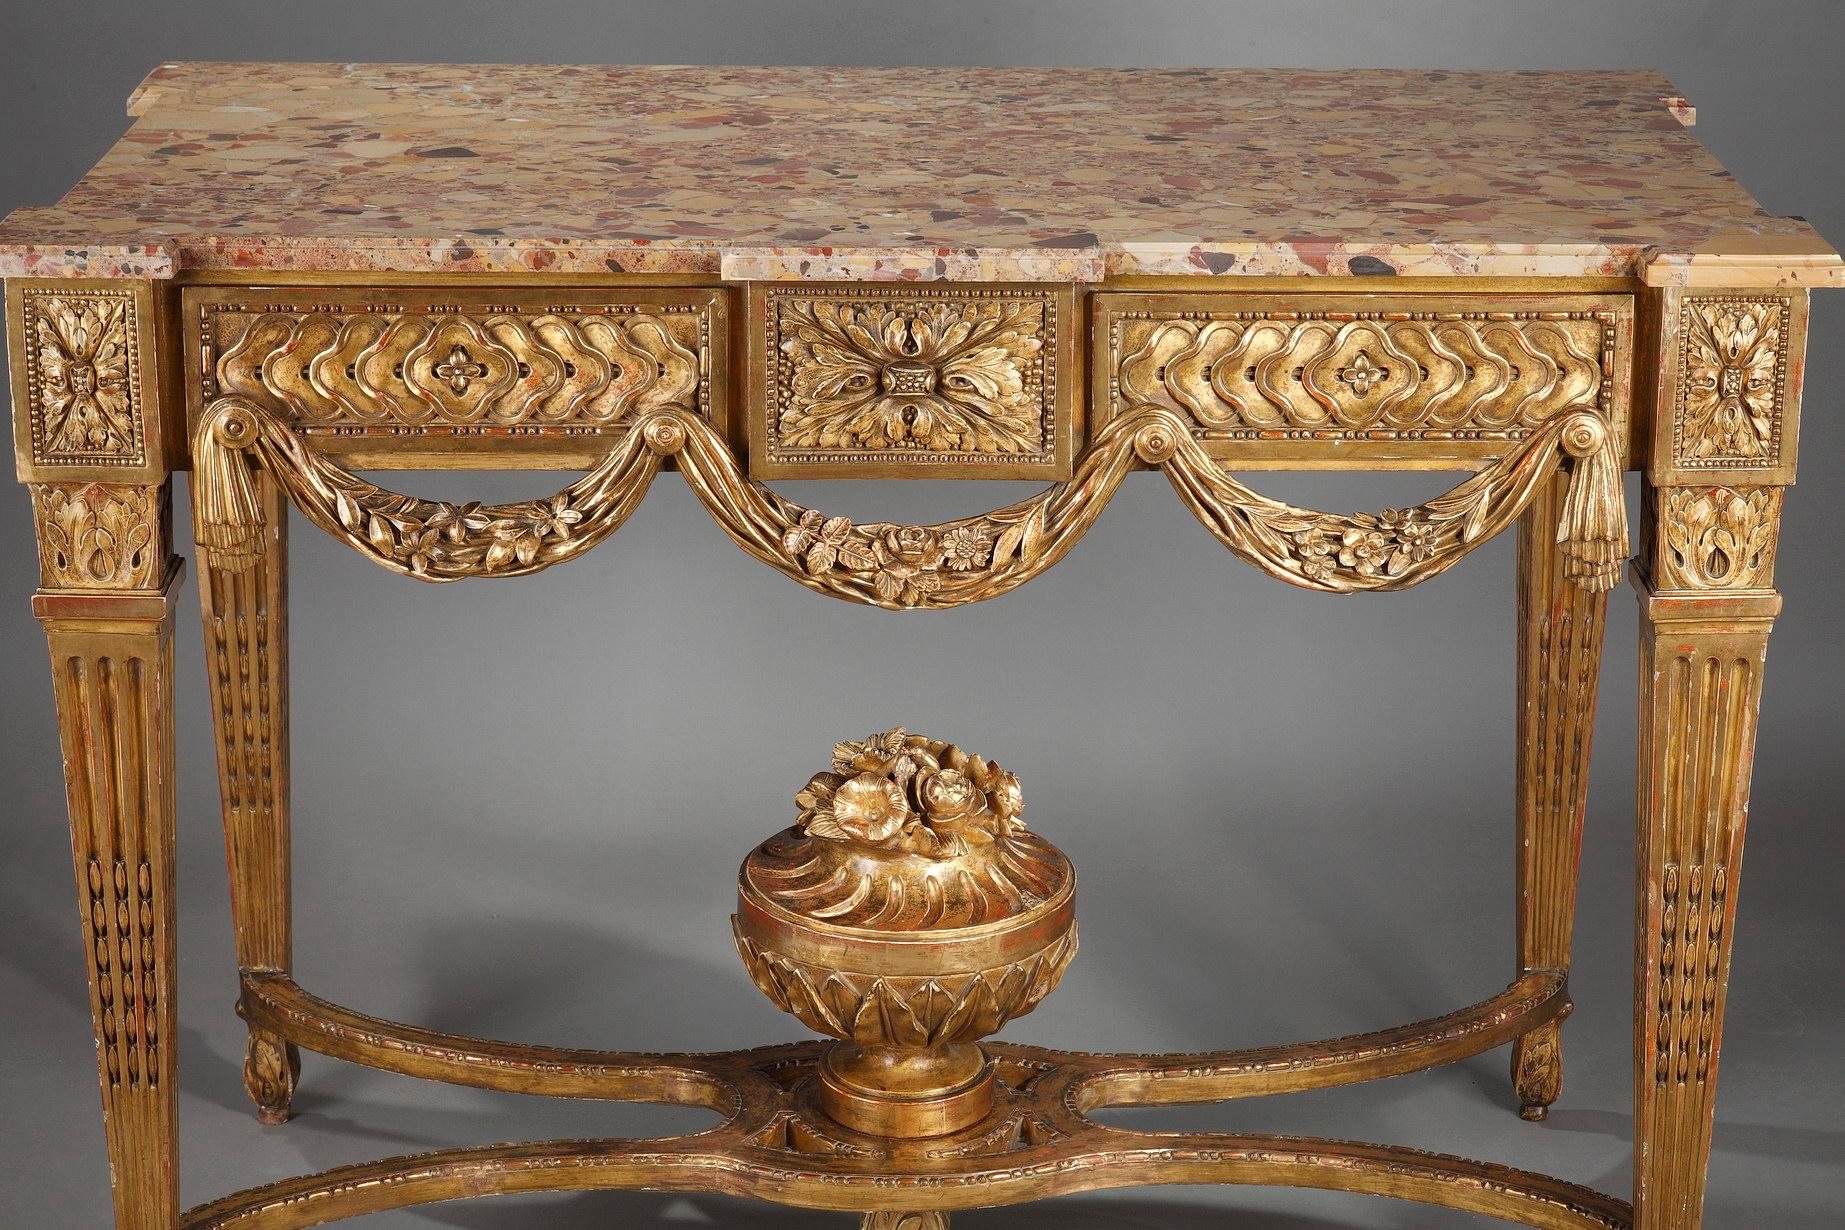 Gilt Gilded and Carved Wood Console in the Louis XVI Style